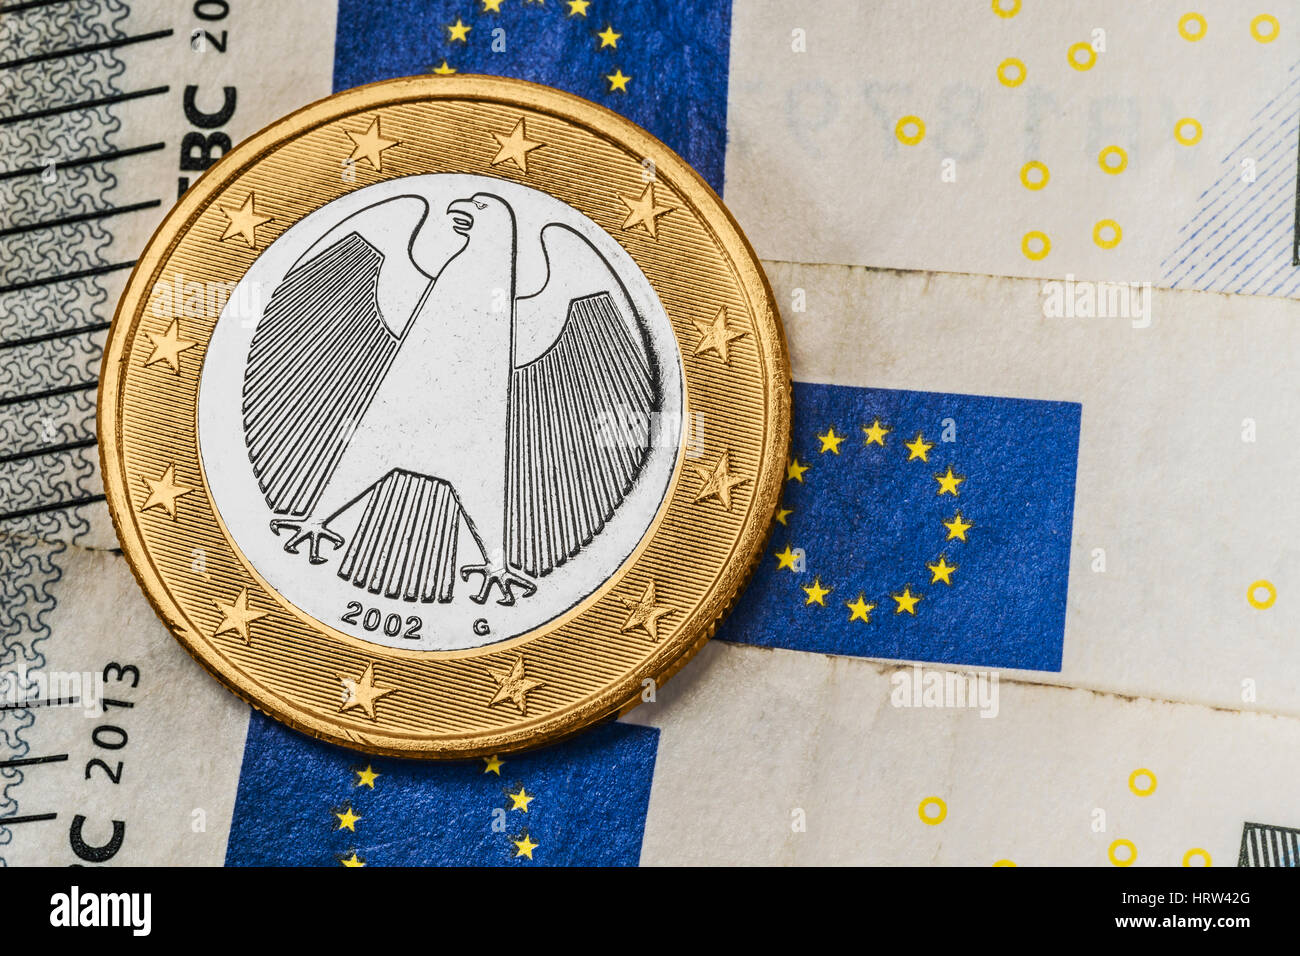 a 1 euro coin from Germany on euro banknotes Stock Photo